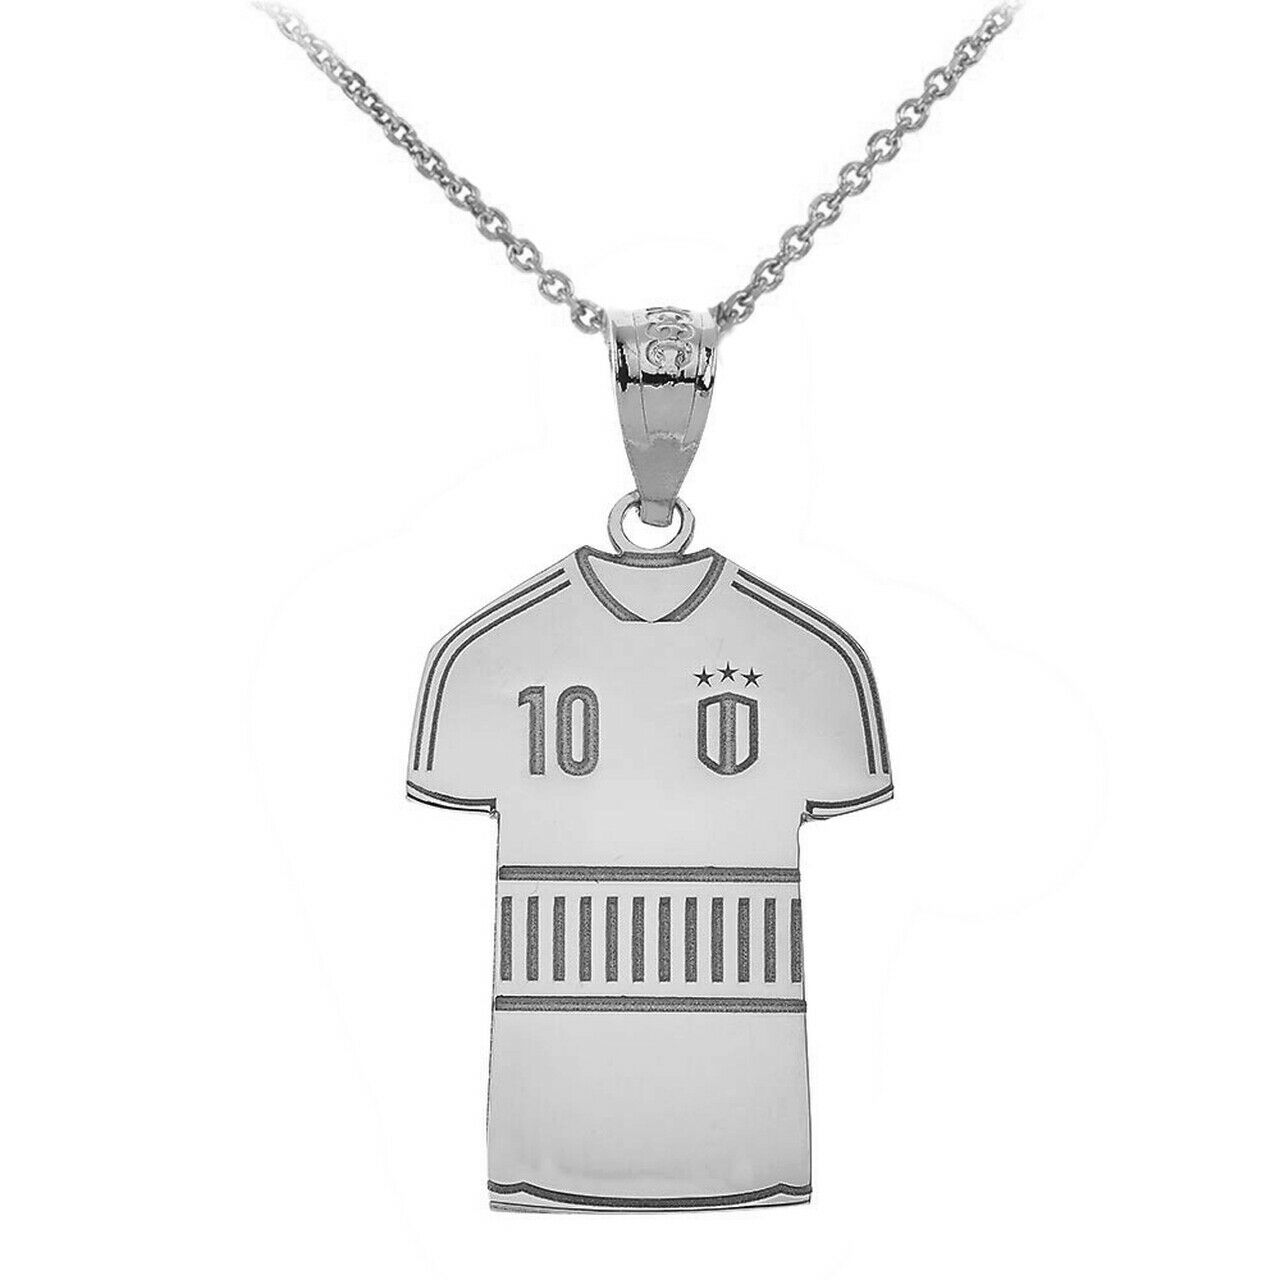 Personalized Name Number Silver Soccer Jersey Shirt Pendant Necklace